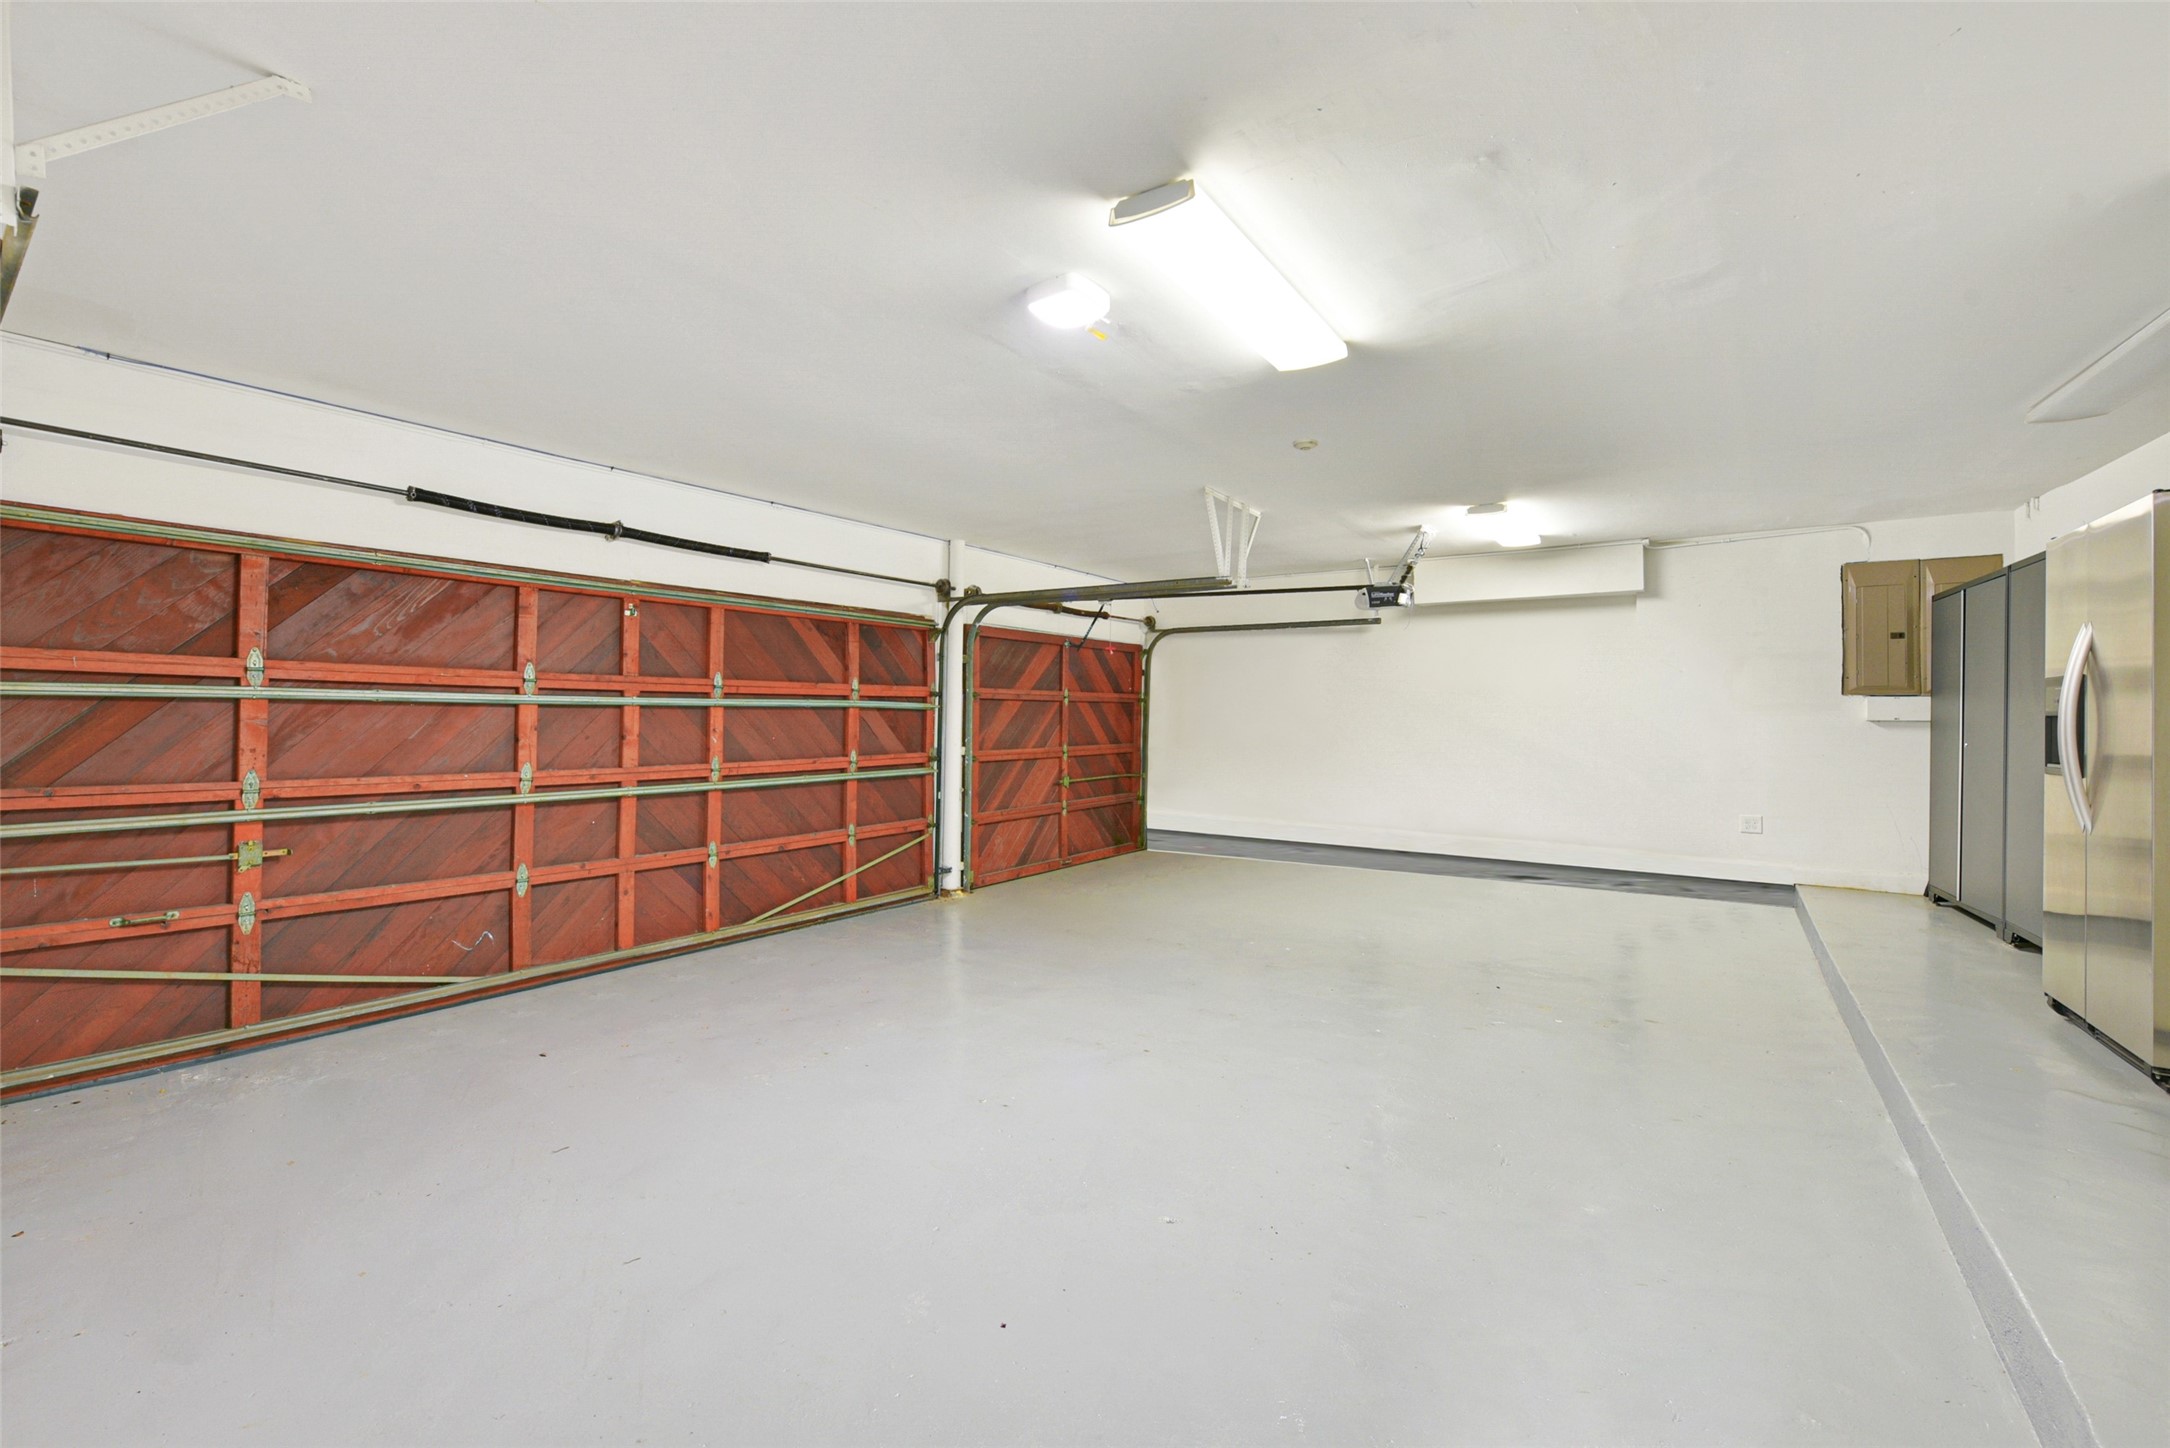 A view inside the three car garage featuring two large storage closets.